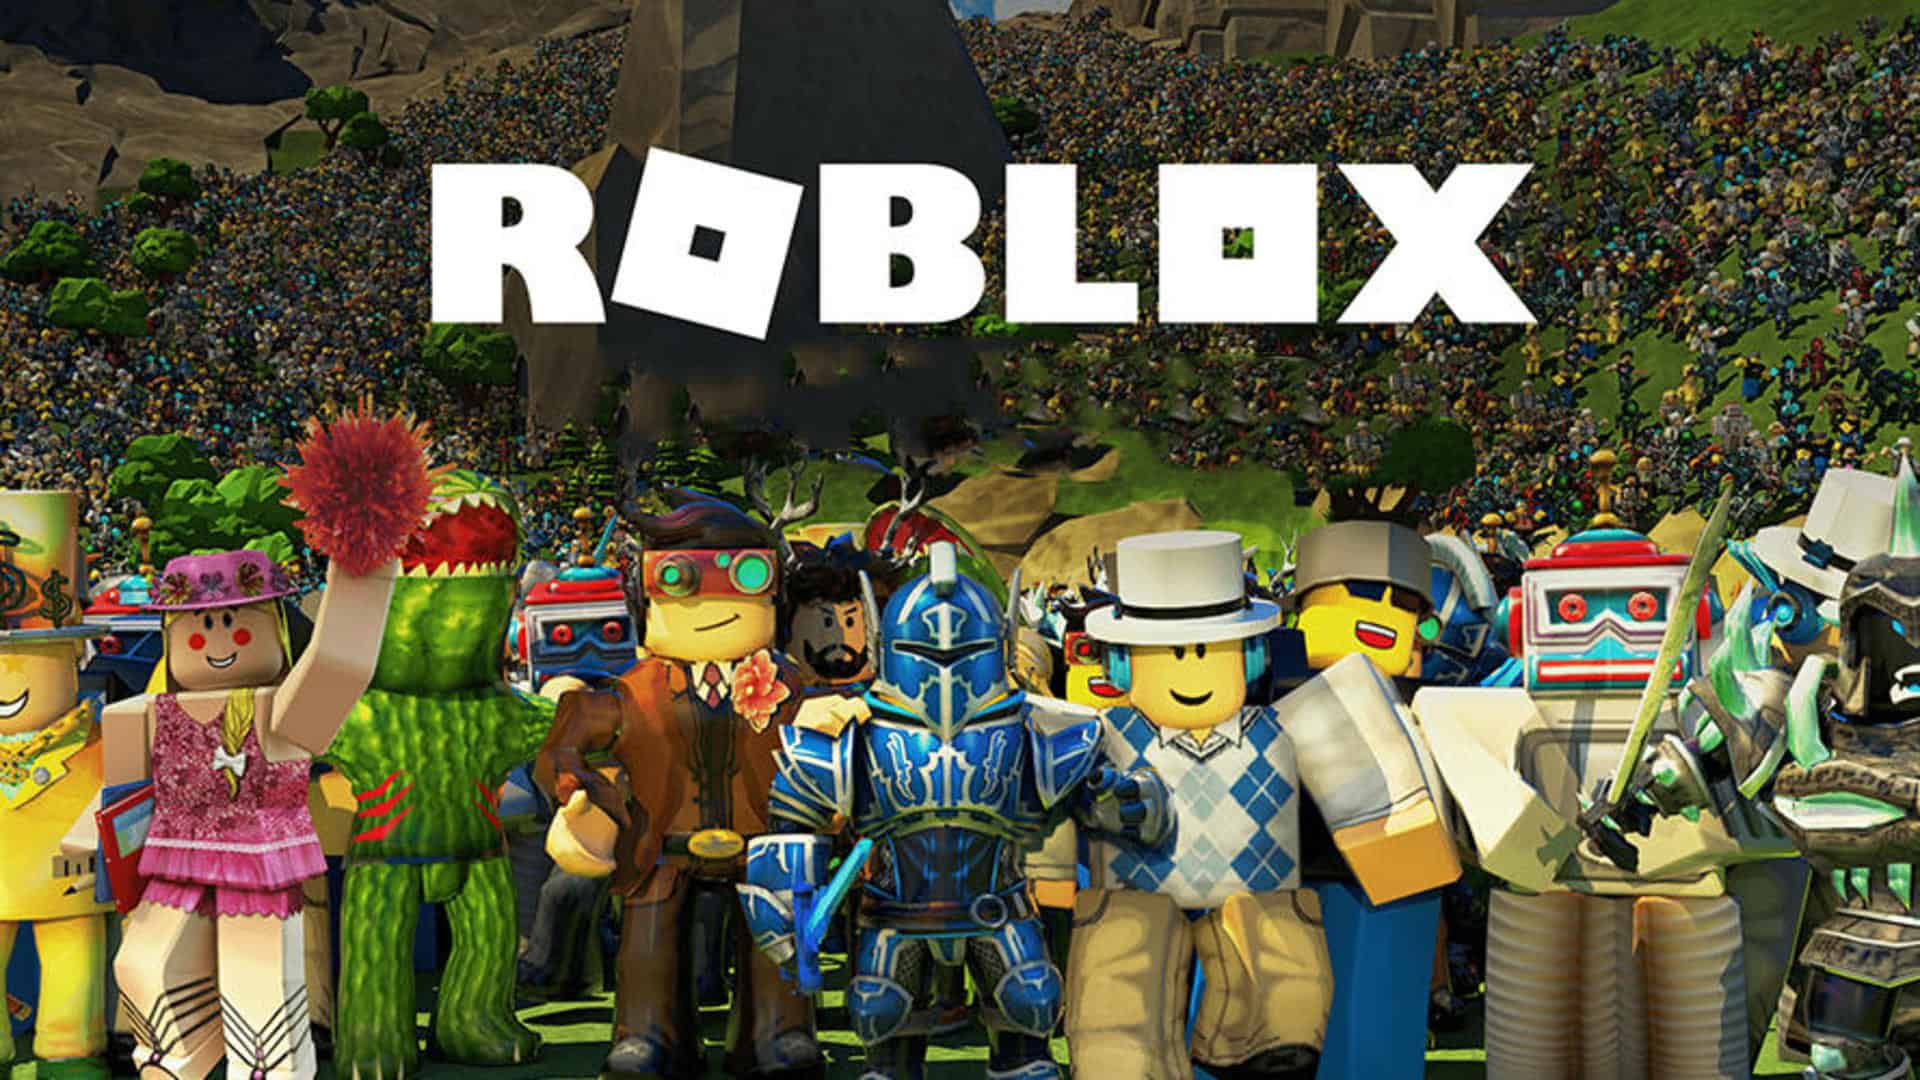 Bloxy news - ATTENTION There has been glitches and bugs